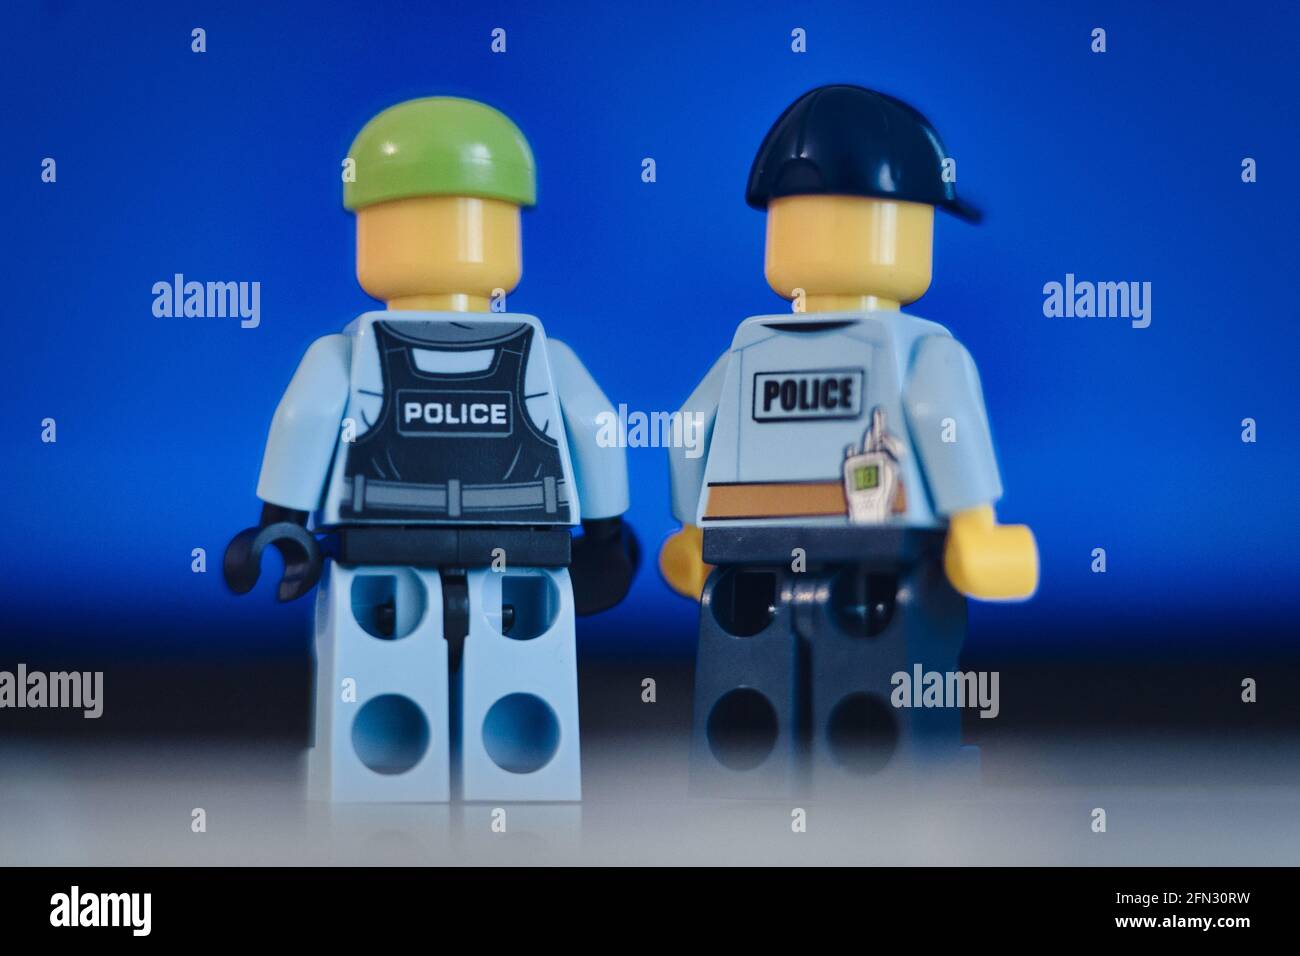 MUNICH, GERMANY - May 13, 2021: Lego figure of a police officer standing in front of blue background. Police and justice system concept Stock Photo